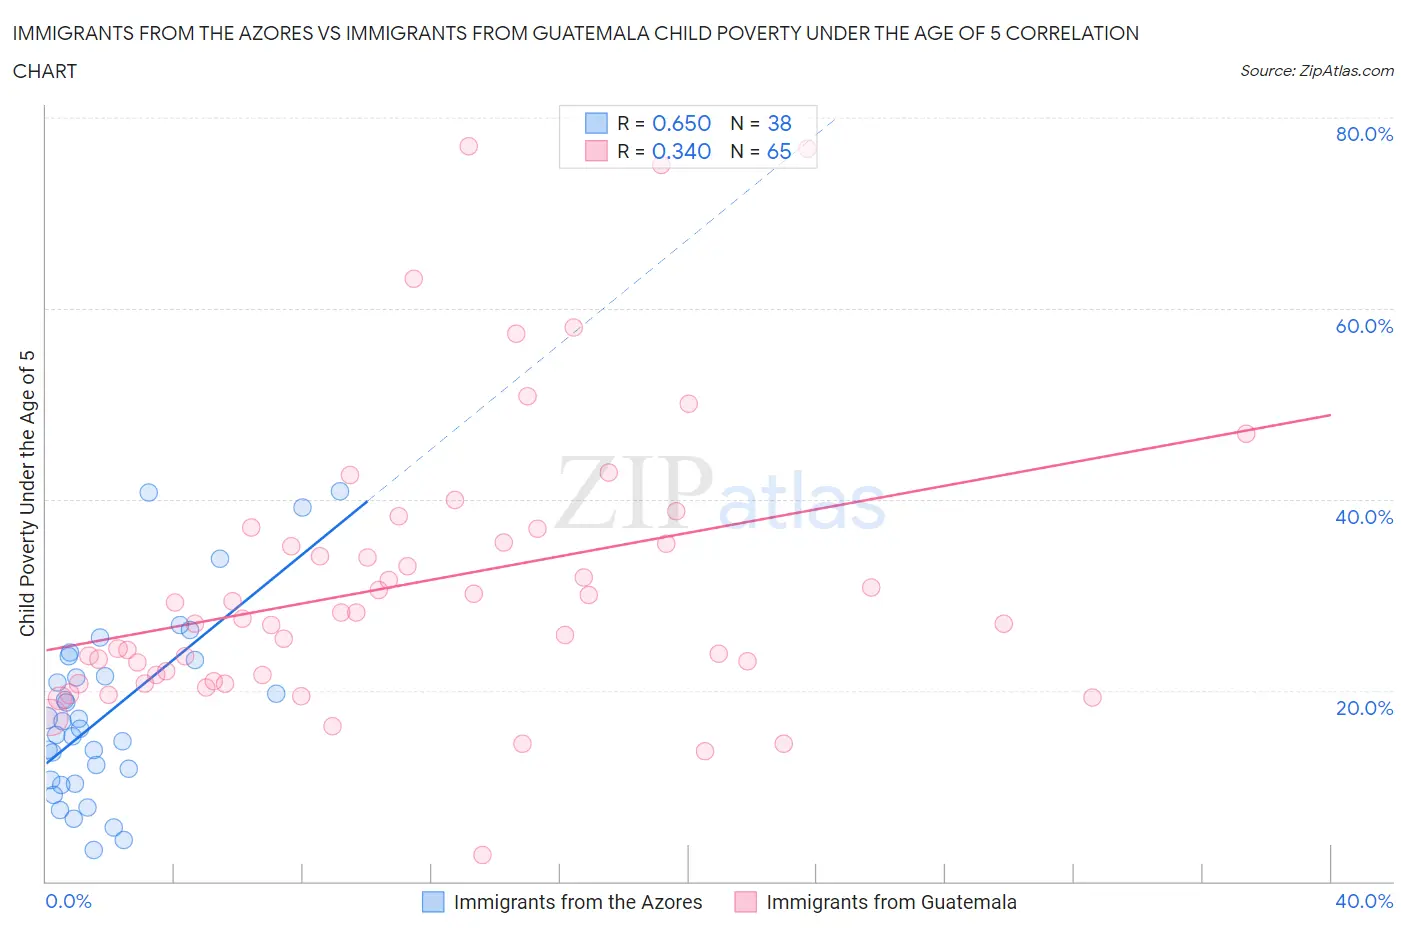 Immigrants from the Azores vs Immigrants from Guatemala Child Poverty Under the Age of 5